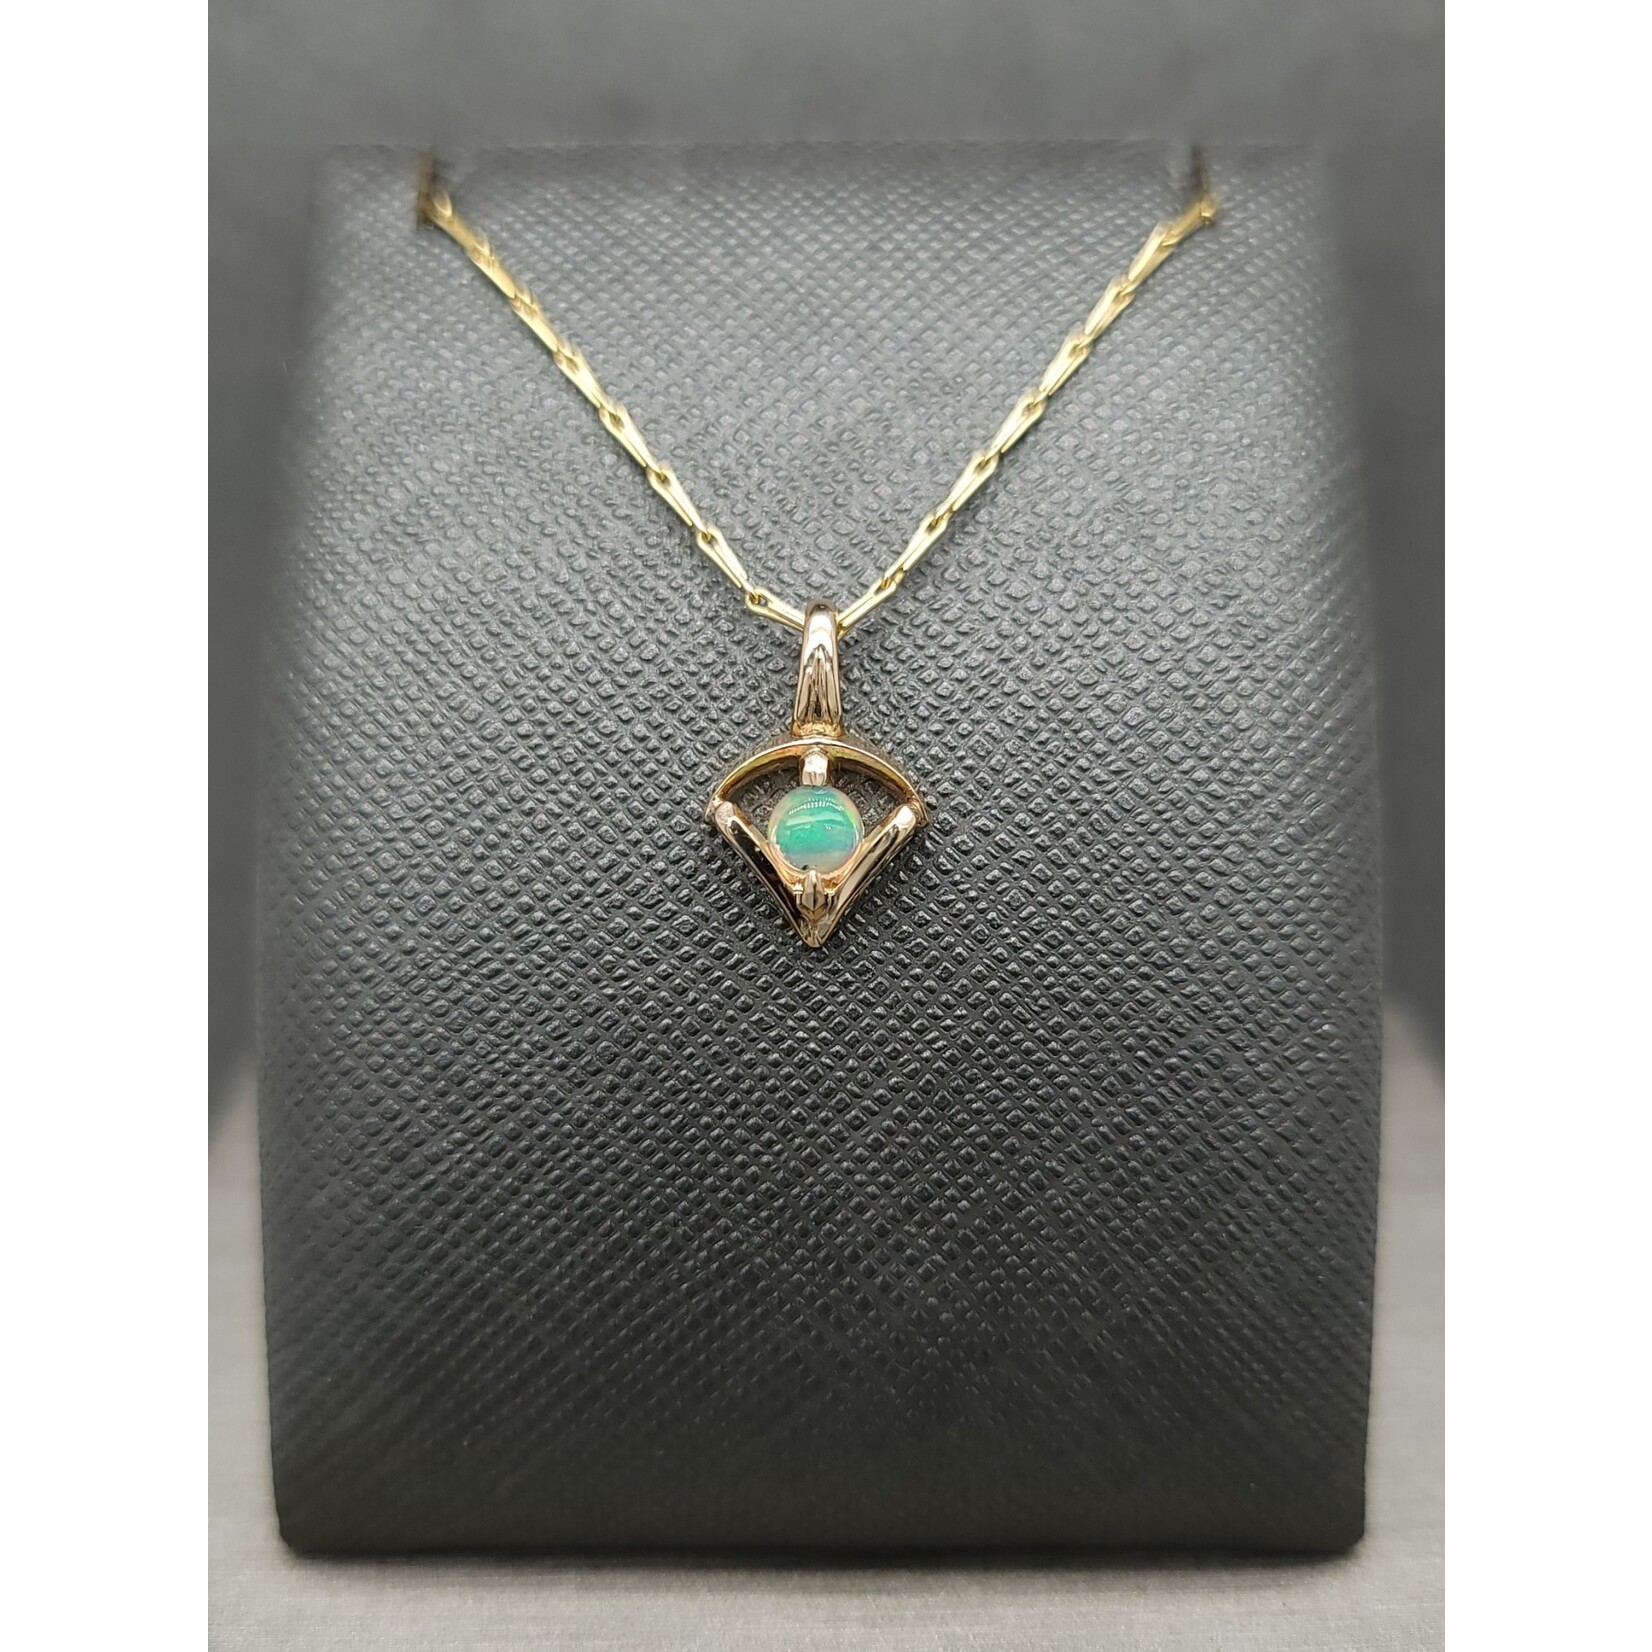 Modern Heirloom® Petite Amulet of the Moon, Opal & 14k yellow gold